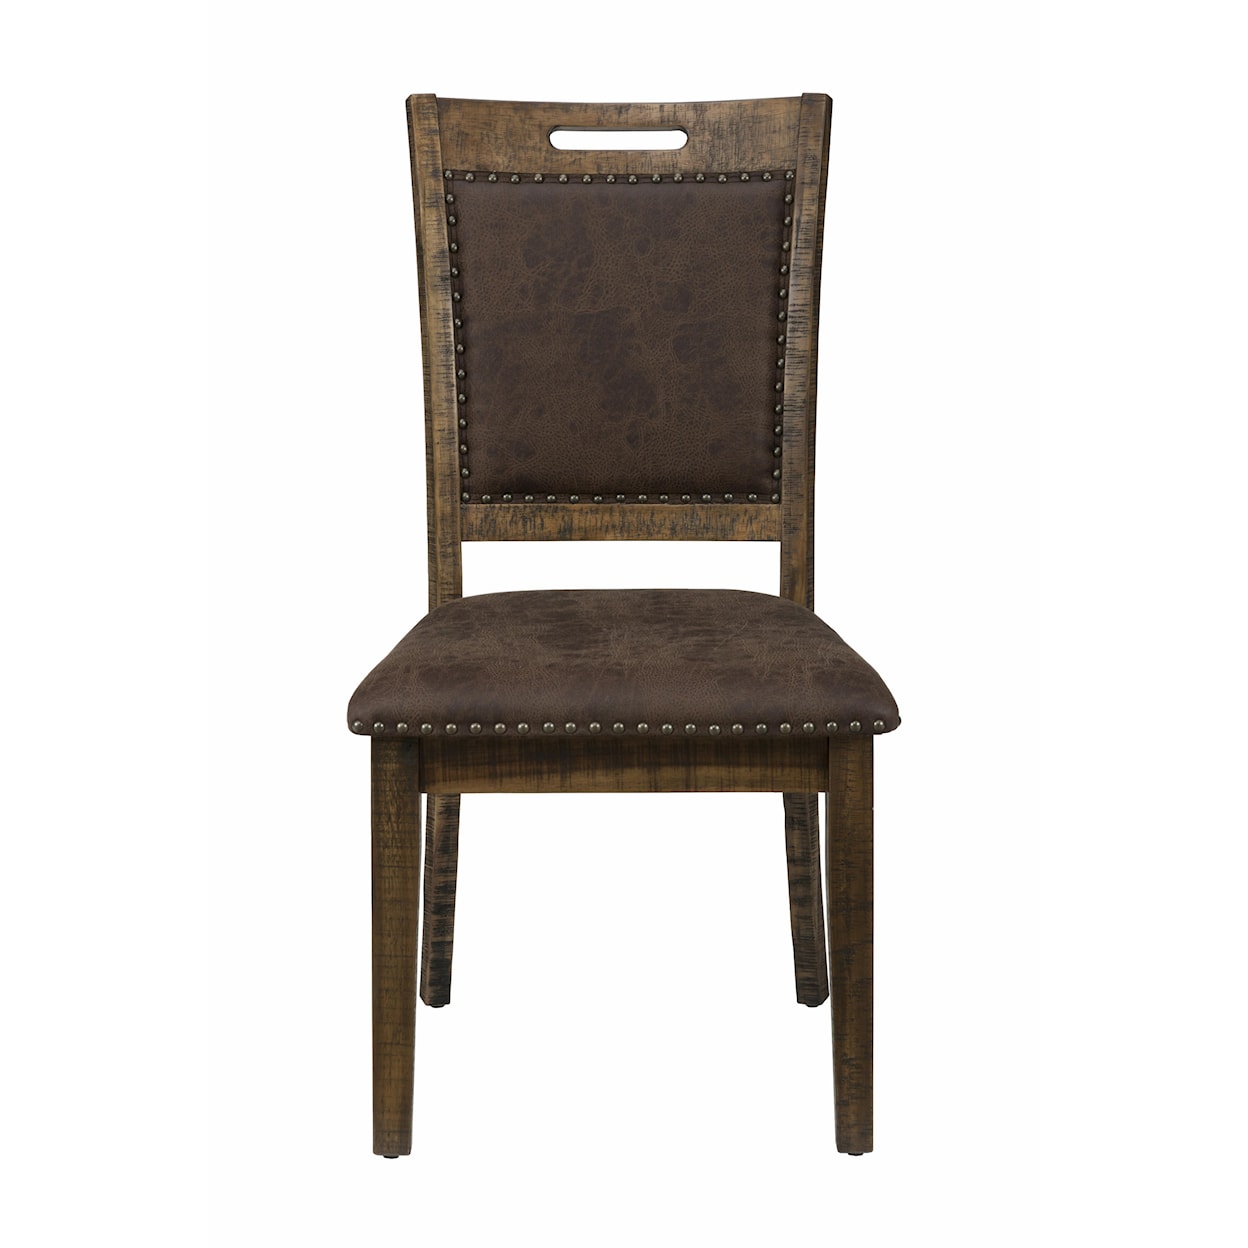 Jofran Cannon Valley Upholstered Back Dining Chair